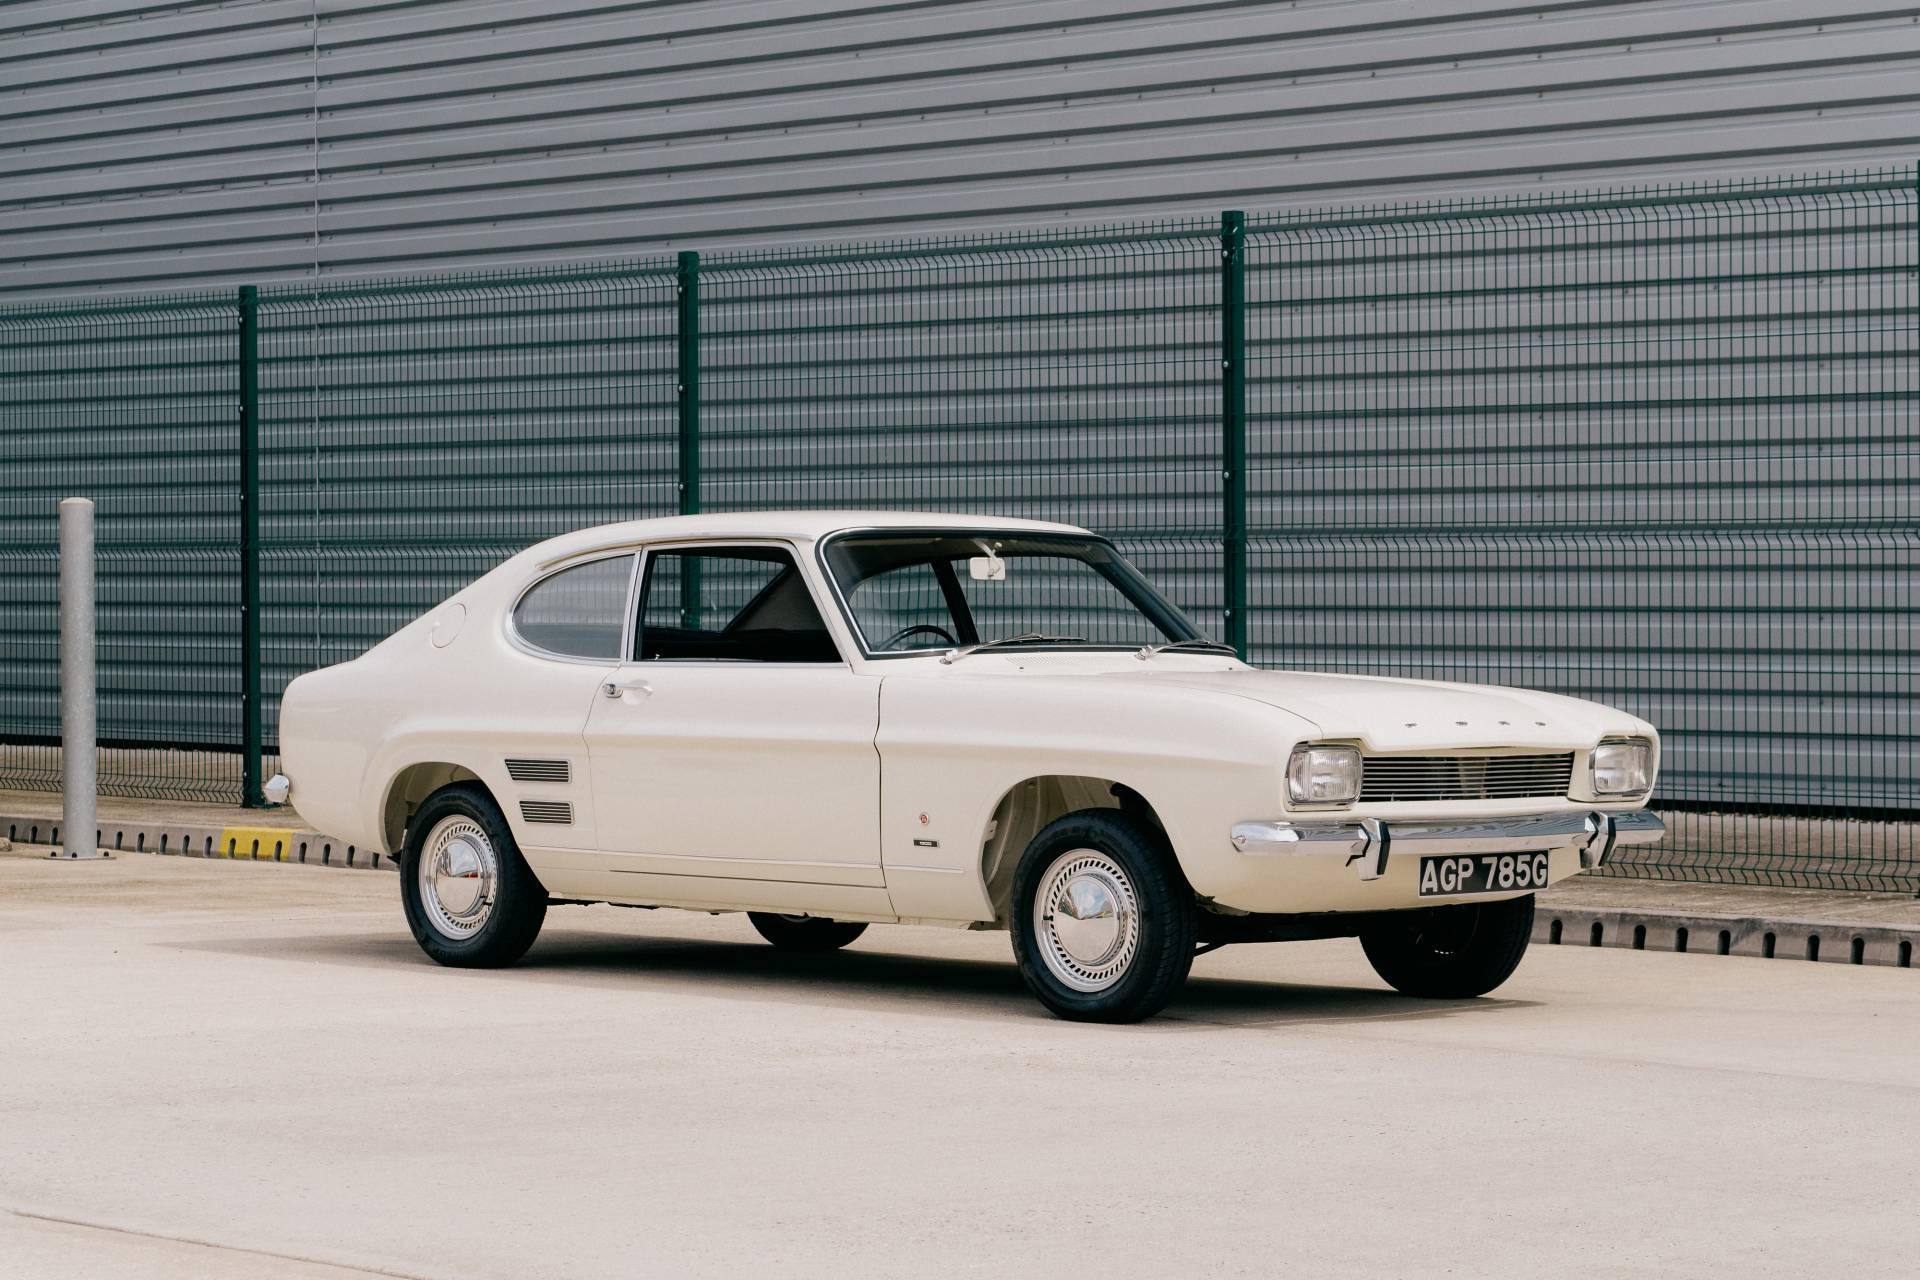 Ford Capri Classic Cars for Sale - Classic Trader